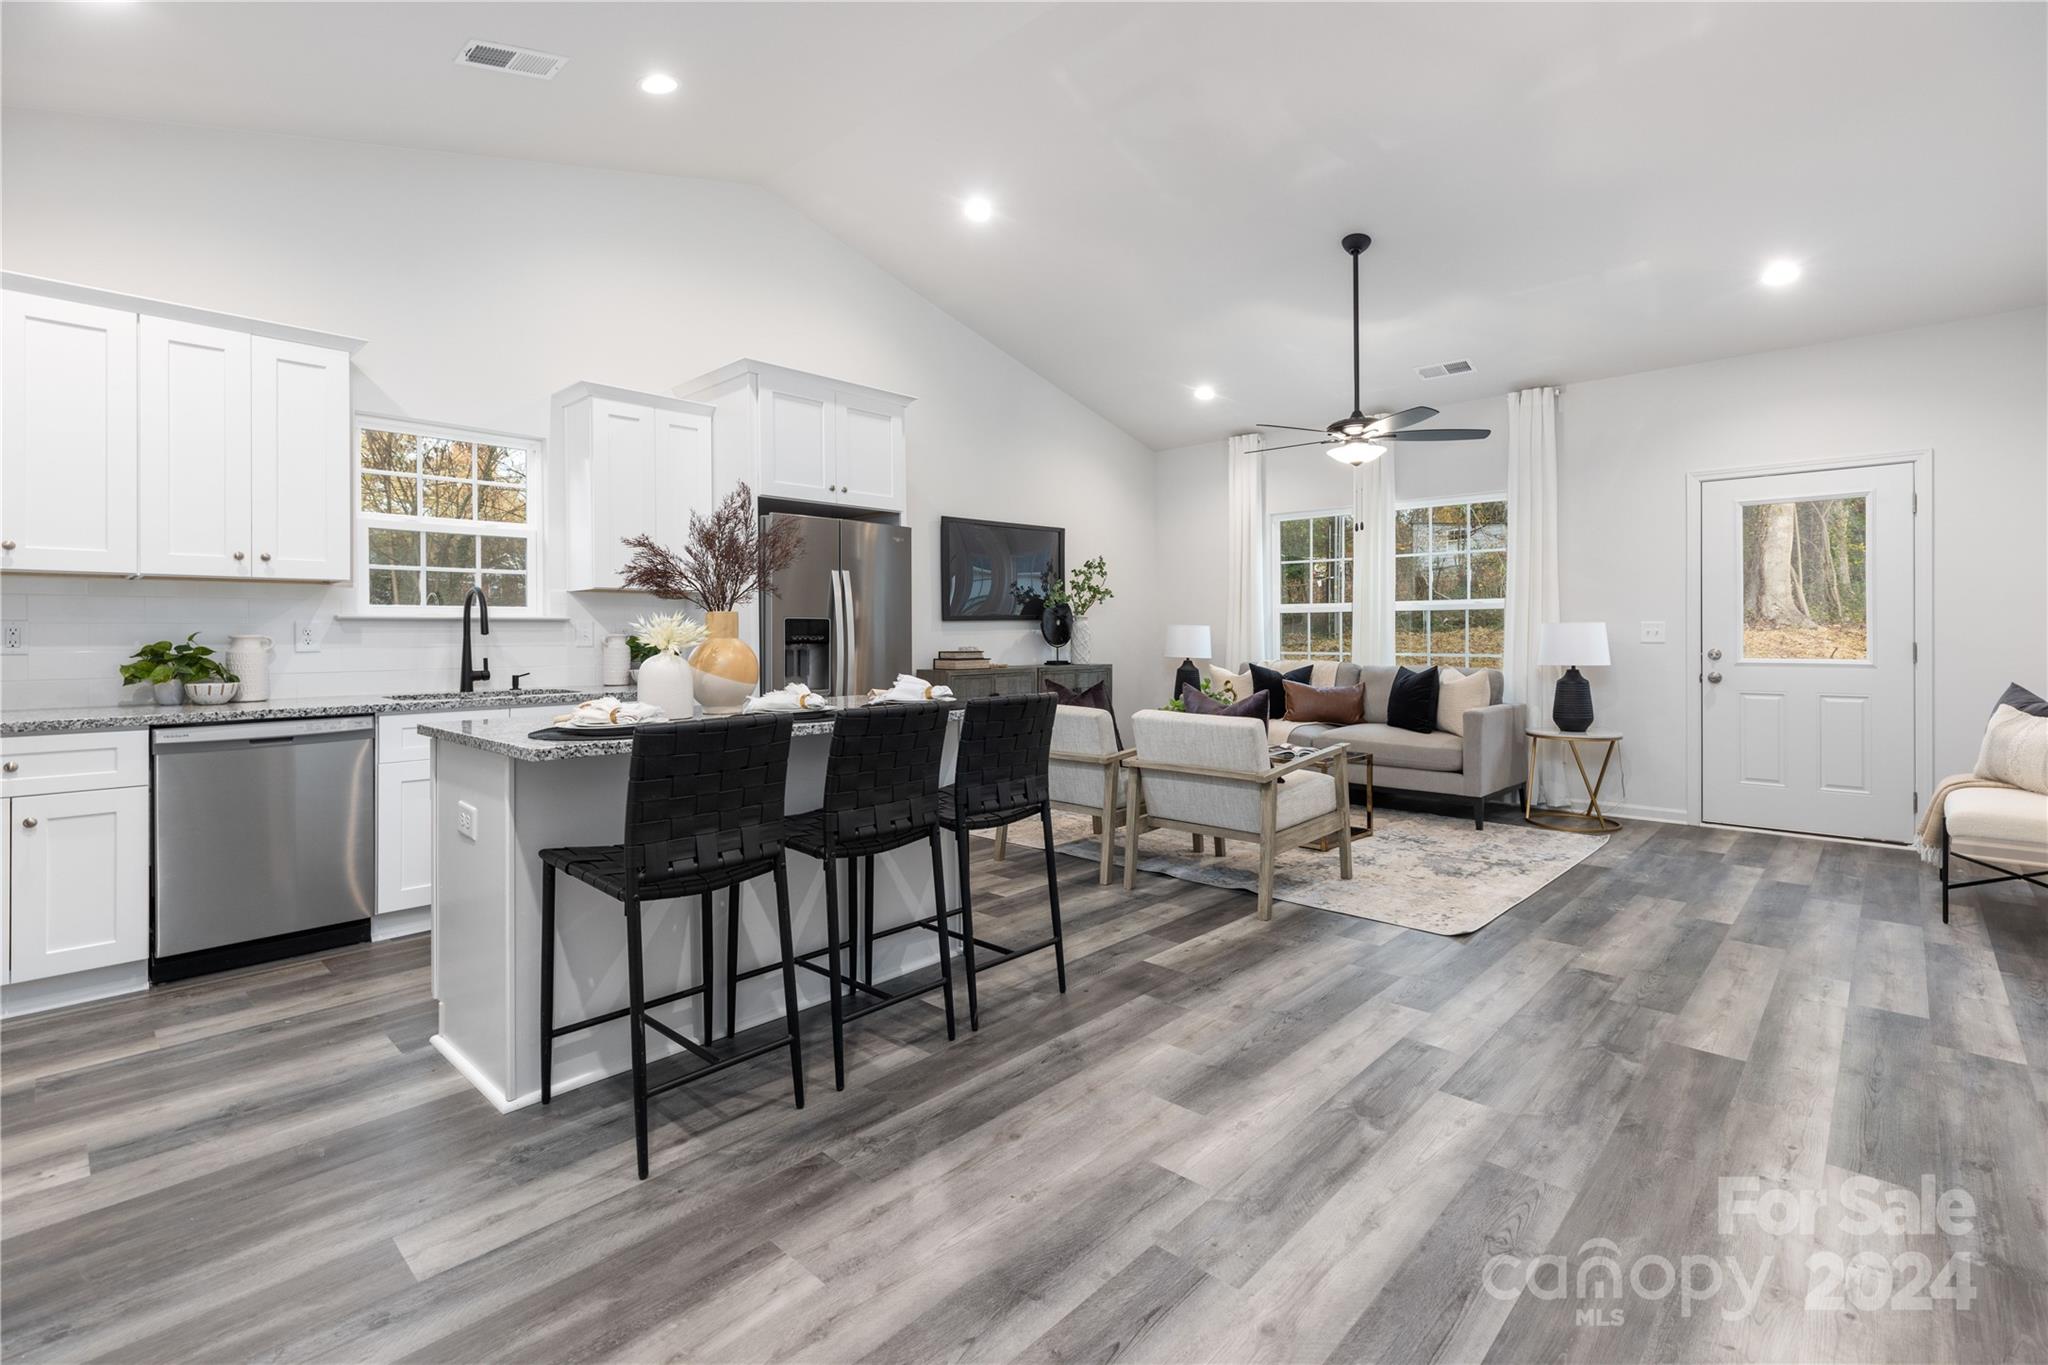 a living room with stainless steel appliances kitchen island granite countertop furniture and a wooden floors